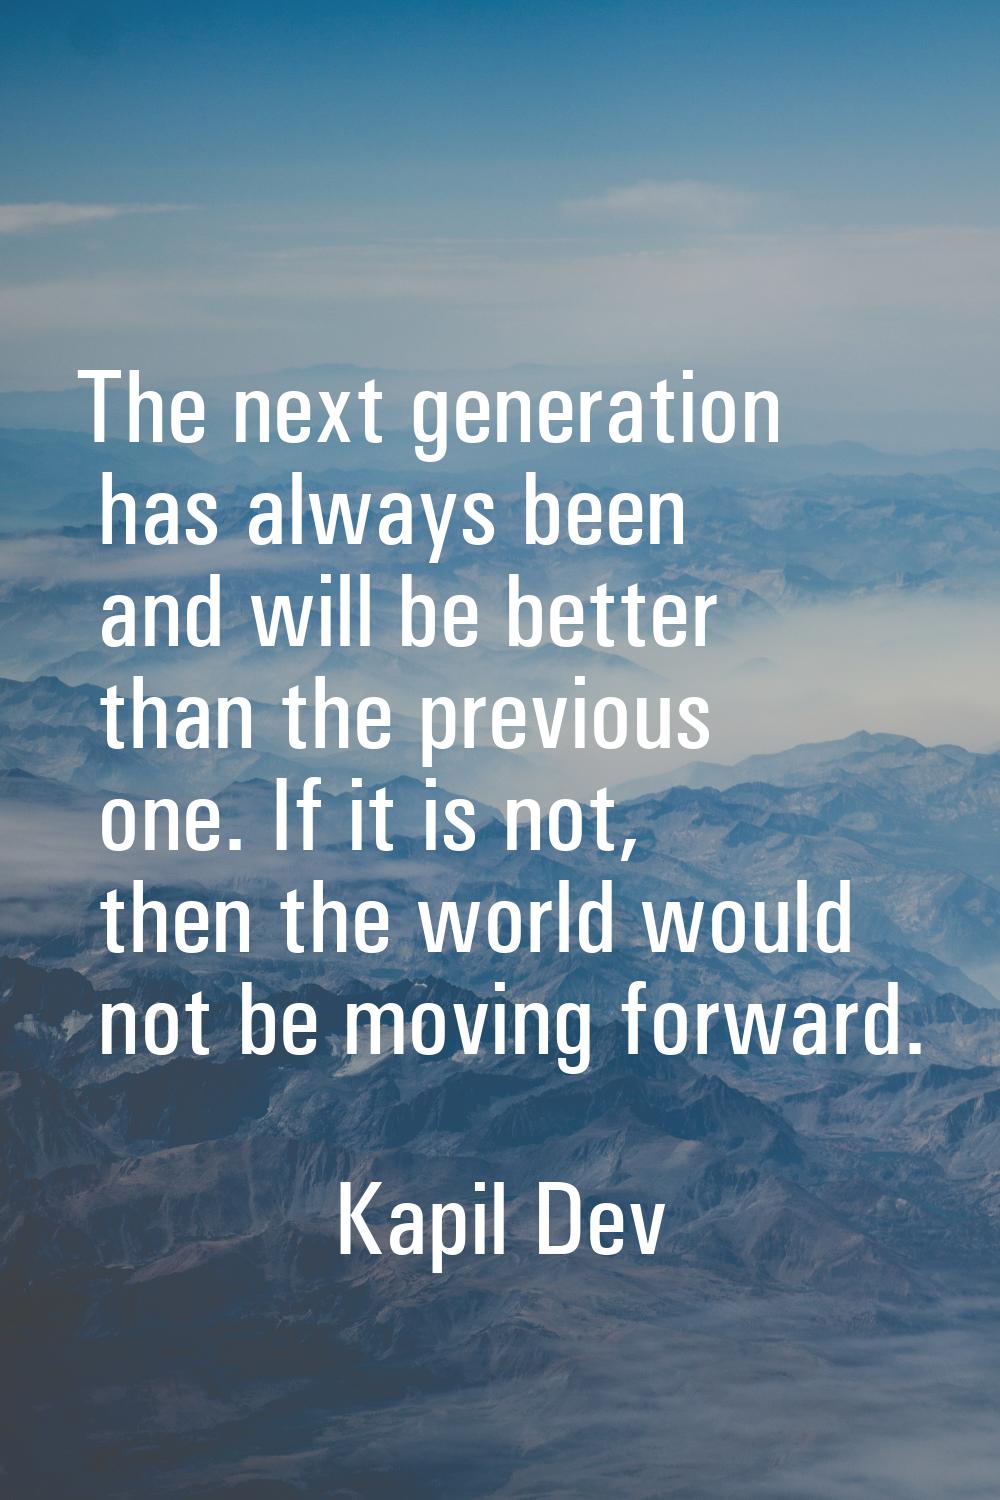 The next generation has always been and will be better than the previous one. If it is not, then th